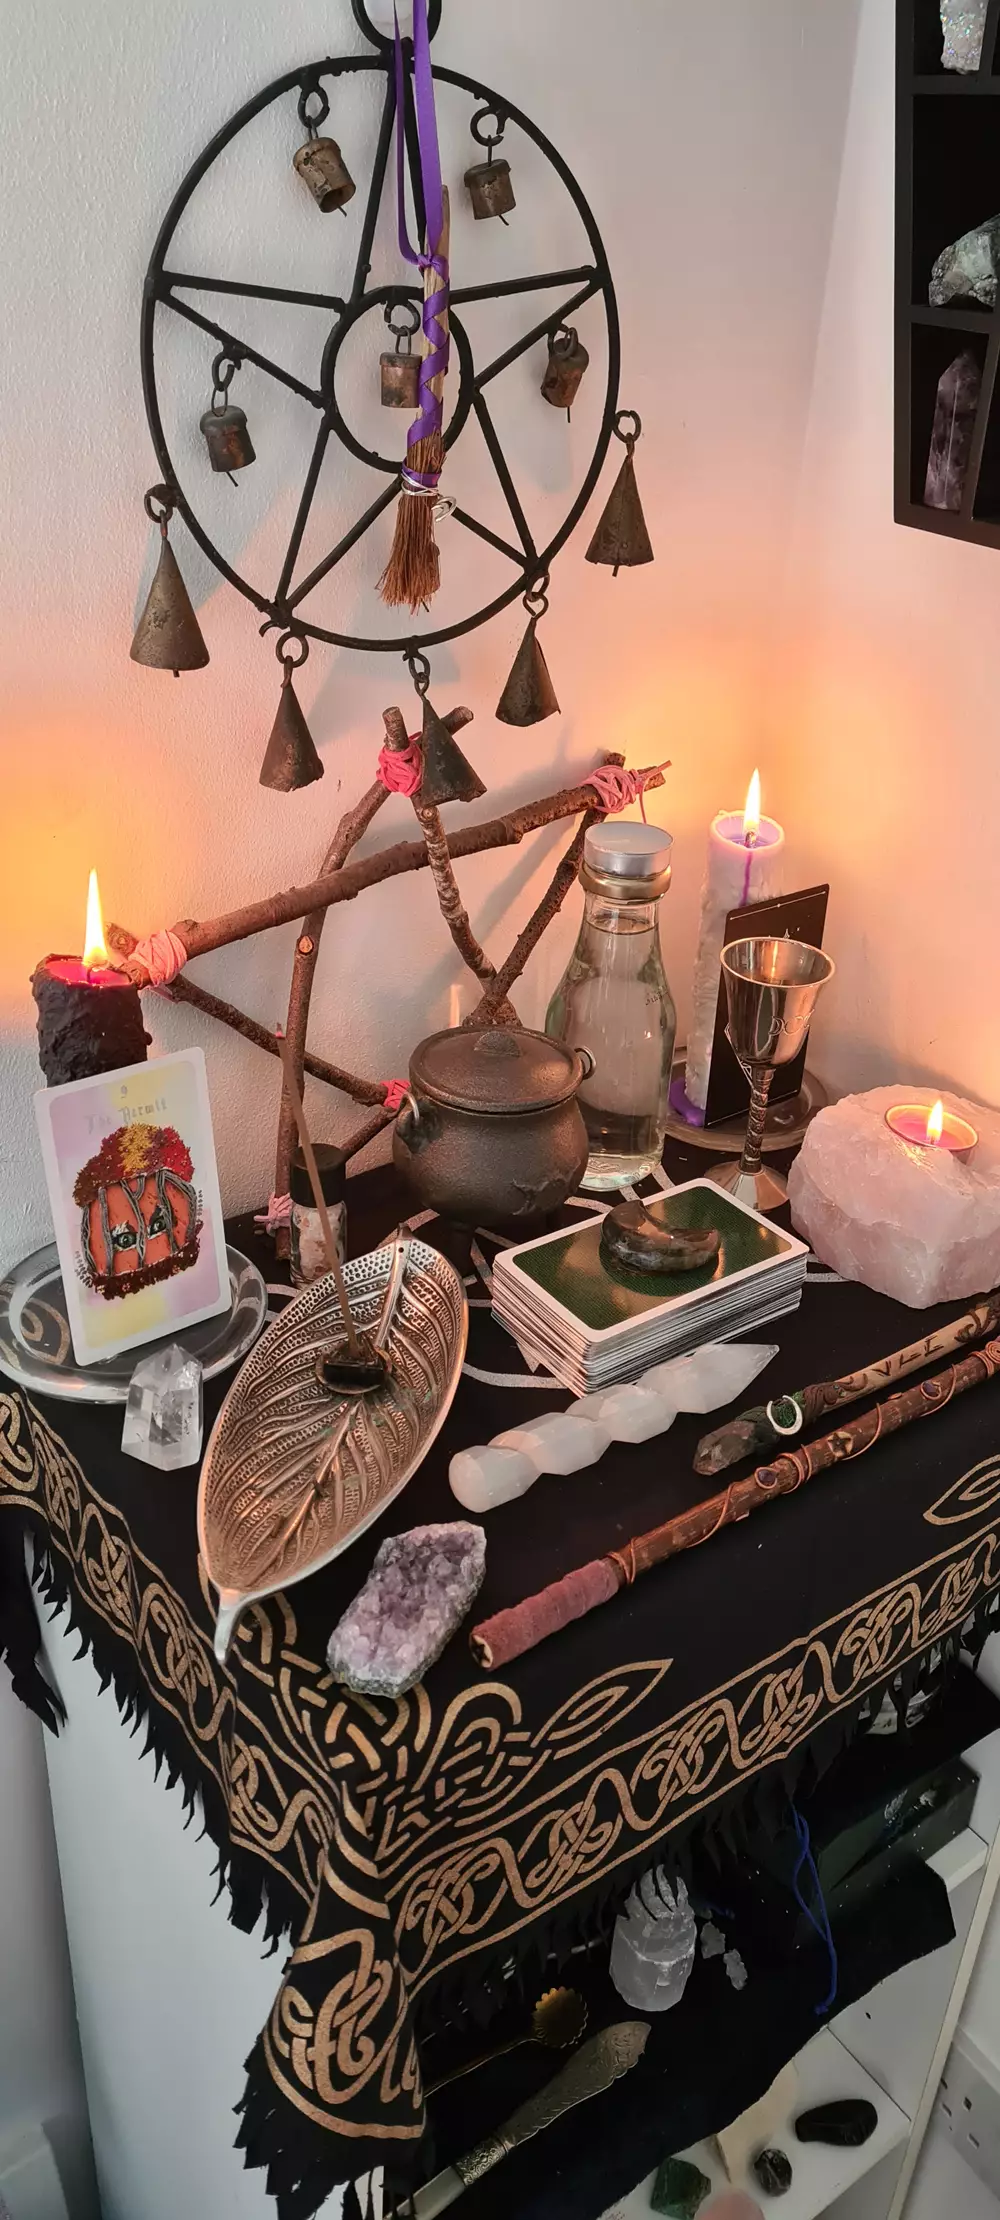 Sadie built an altar in her bedroom where she casts her spells.